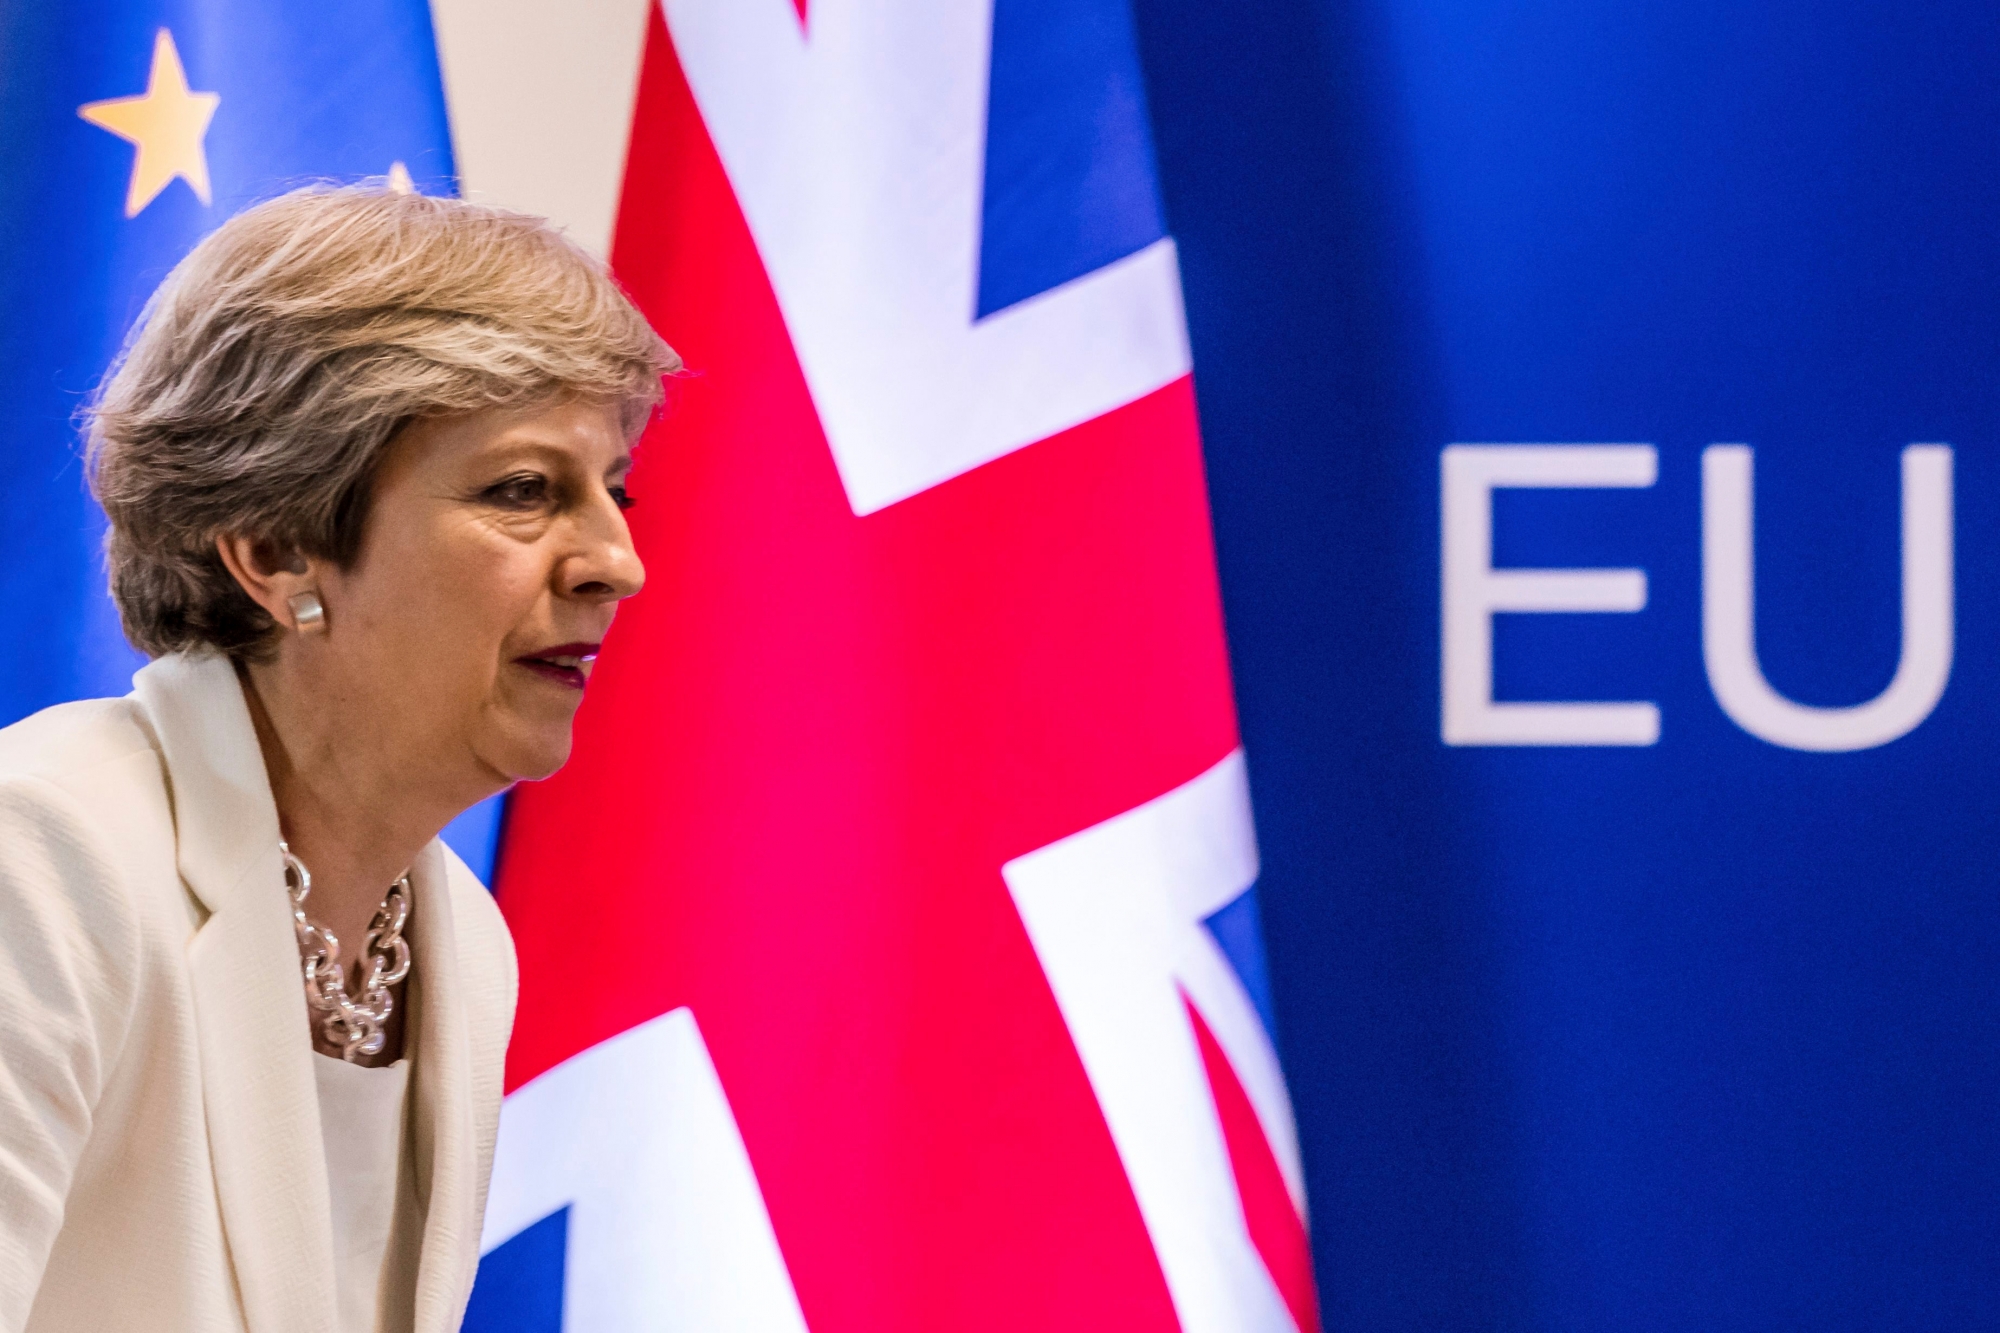 British Prime Minister Theresa May prepares to address a media conference at an EU summit in Brussels on Friday, June 23, 2017. European Union leaders met in Brussels on the final day of their two-day summit to focus on ways to stop migrants crossing the Mediterranean and how to uphold free trade while preventing dumping on Europe's markets. (AP Photo/Geert Vanden Wijngaert) Belgium EU Summit